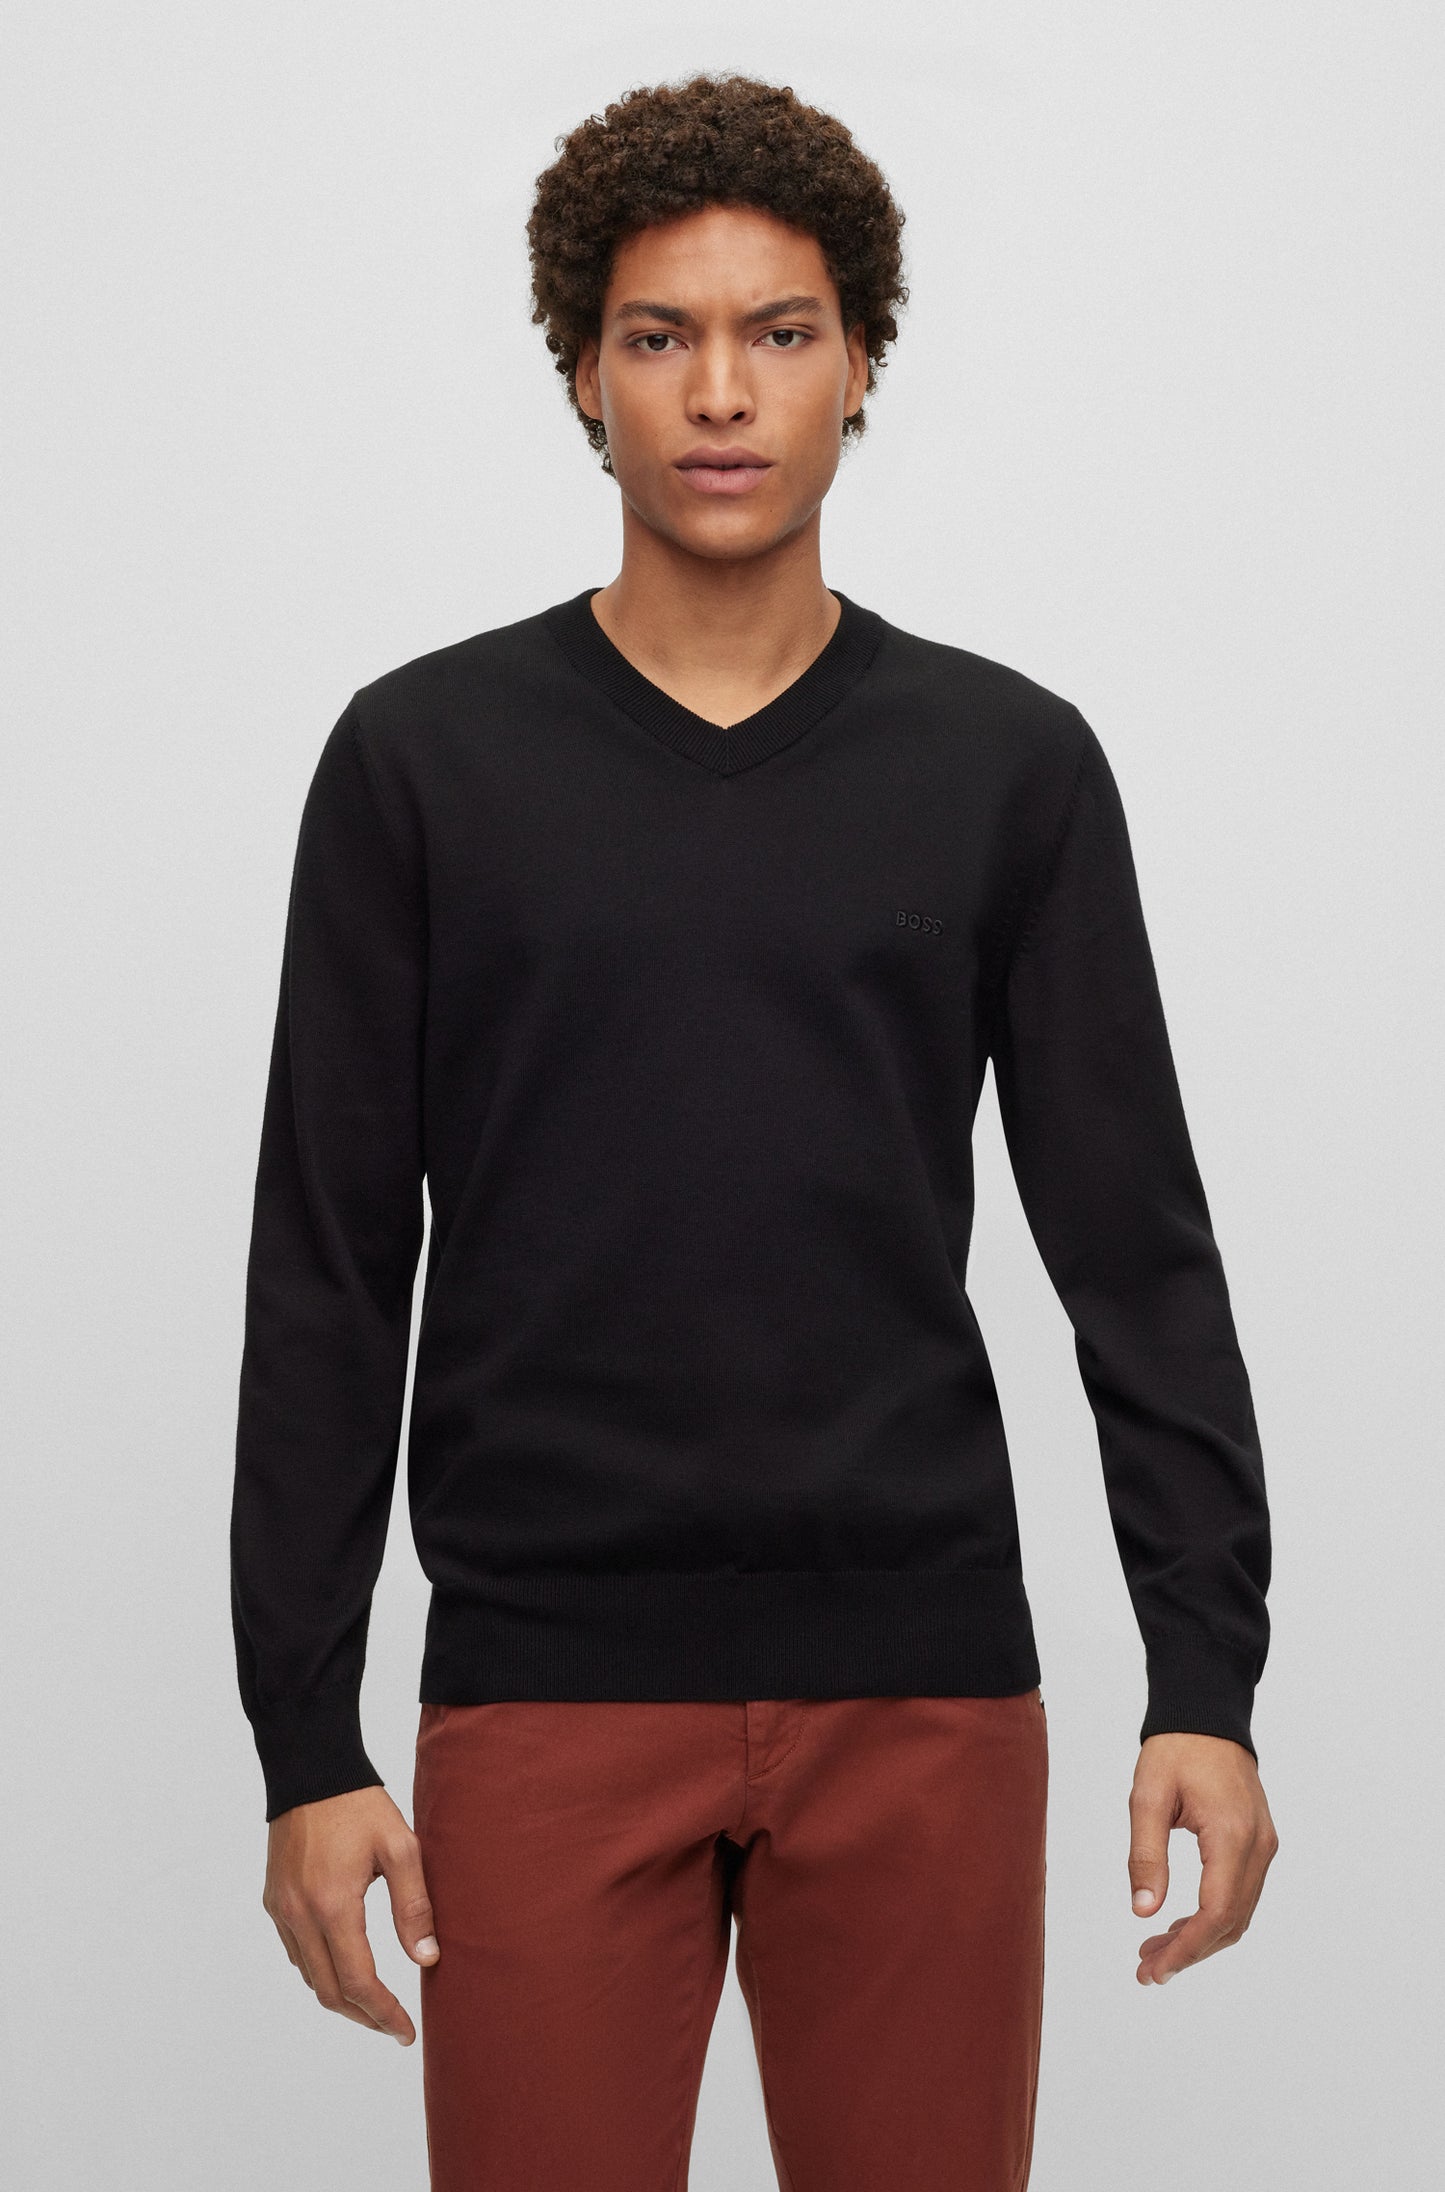 Boss V-Neck Knitwear- Pacello-L bscs